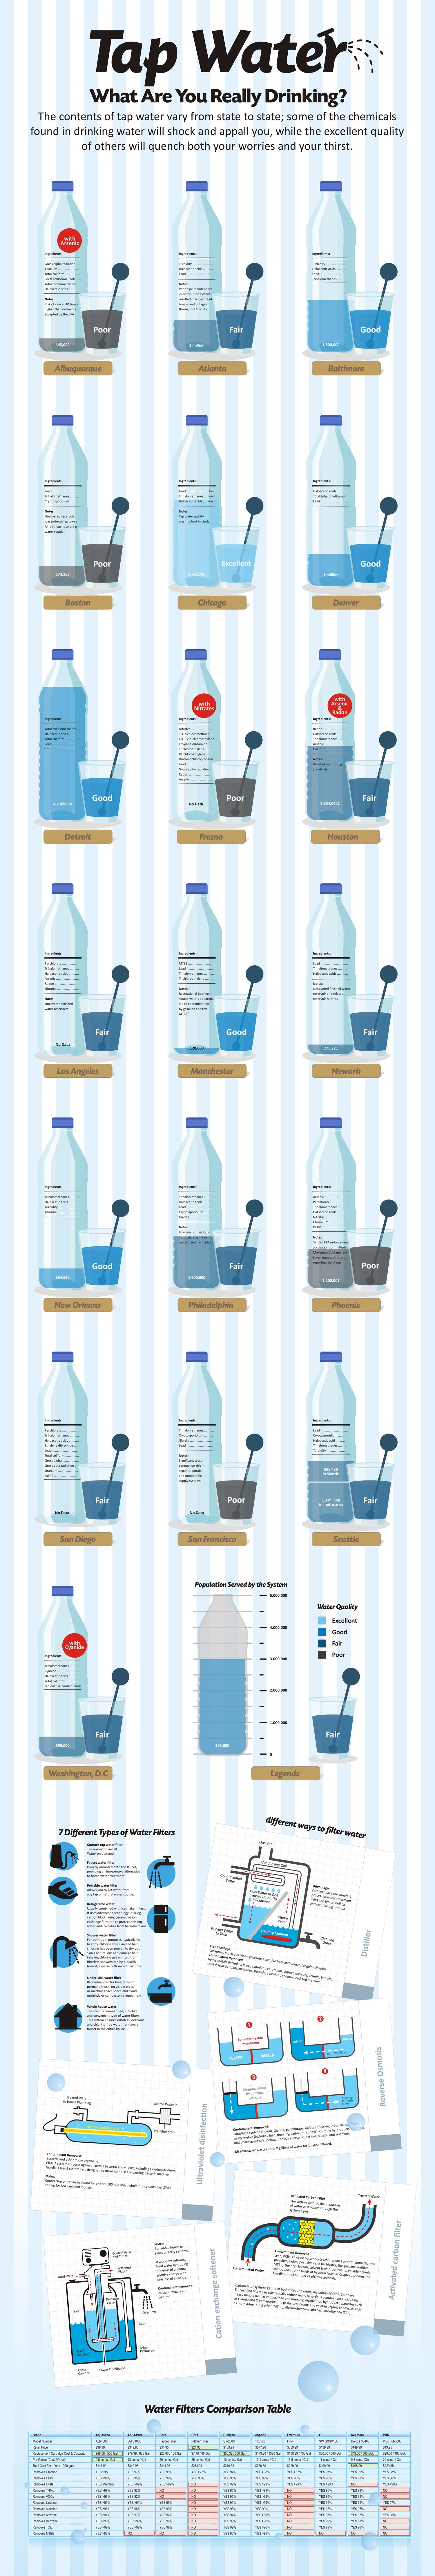 Do You Want To Know What’s In Your Tap Water? Infographic